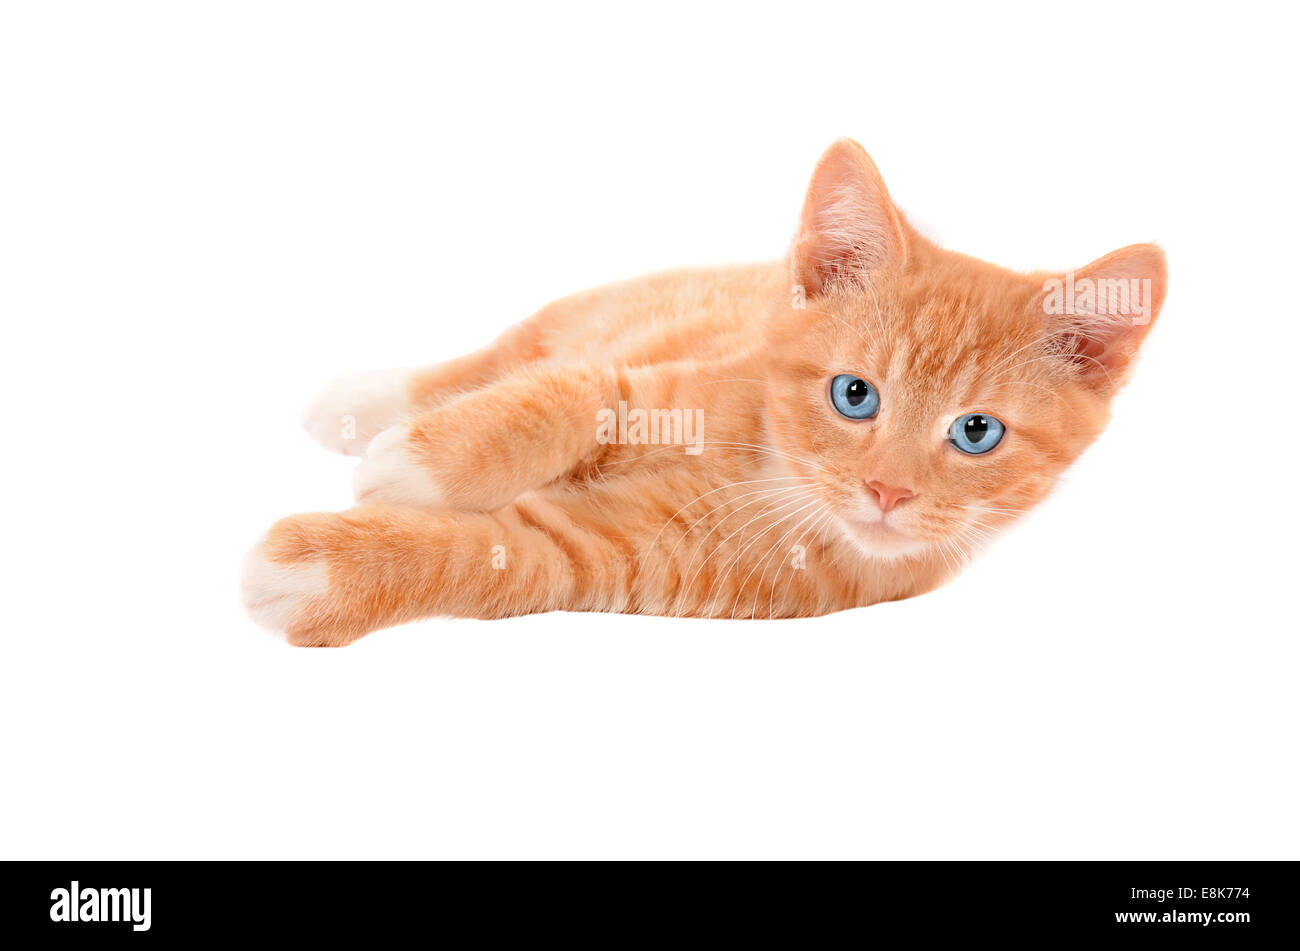 Orange Tabby Cat With Blue Eyes Laying On A White Background Stock Photo Alamy